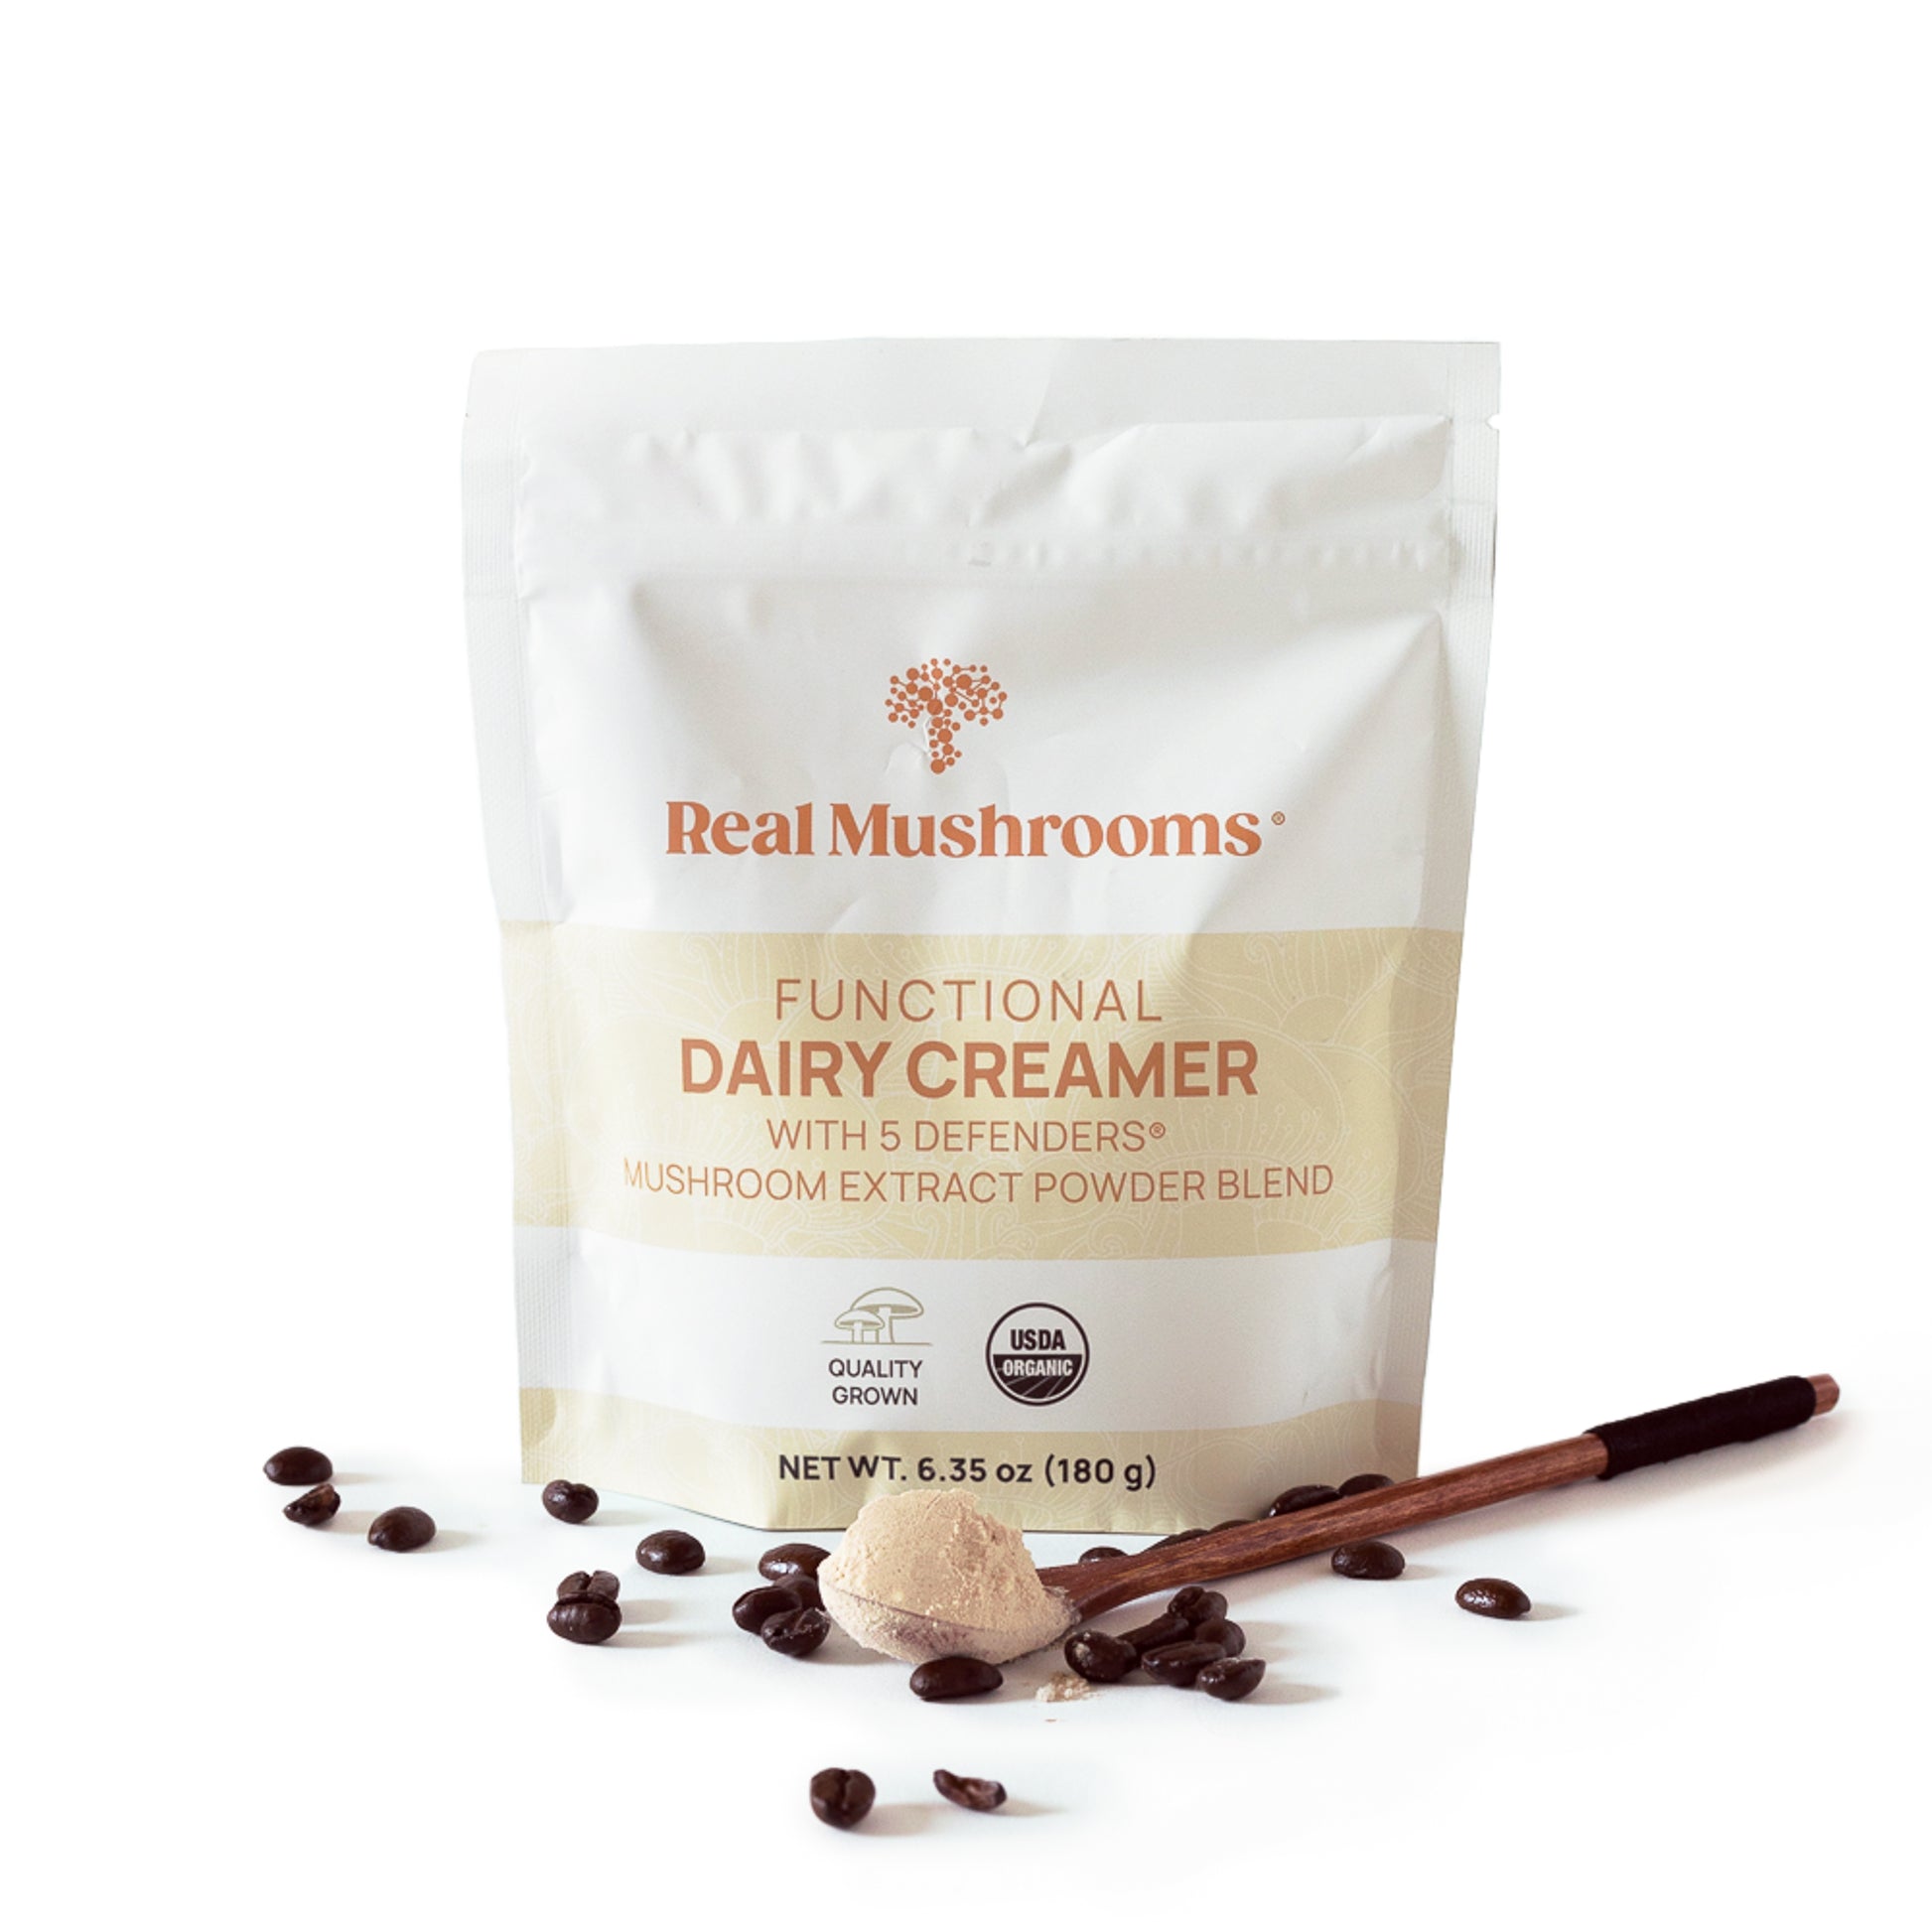 A pack of "Real Mushrooms Functional Dairy Creamer Powder - 20% OFF" with coffee beans and a wooden spoon spilling powder on a white background.